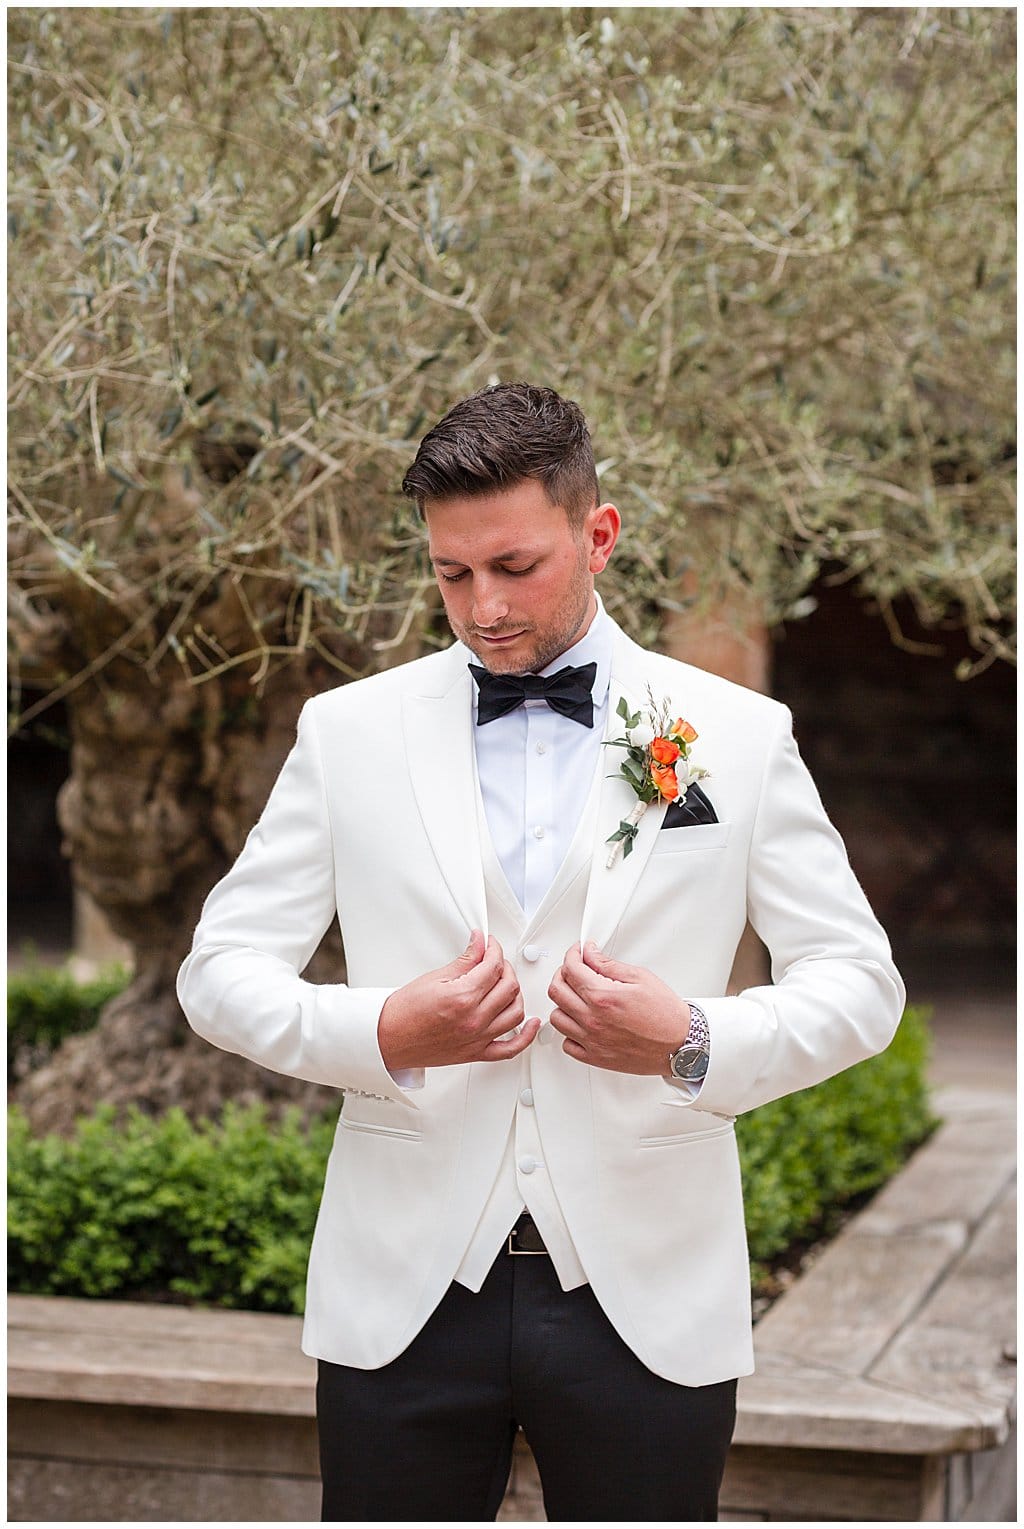 Groom wearing white tuxedo and black bow tie adjusting his jacket